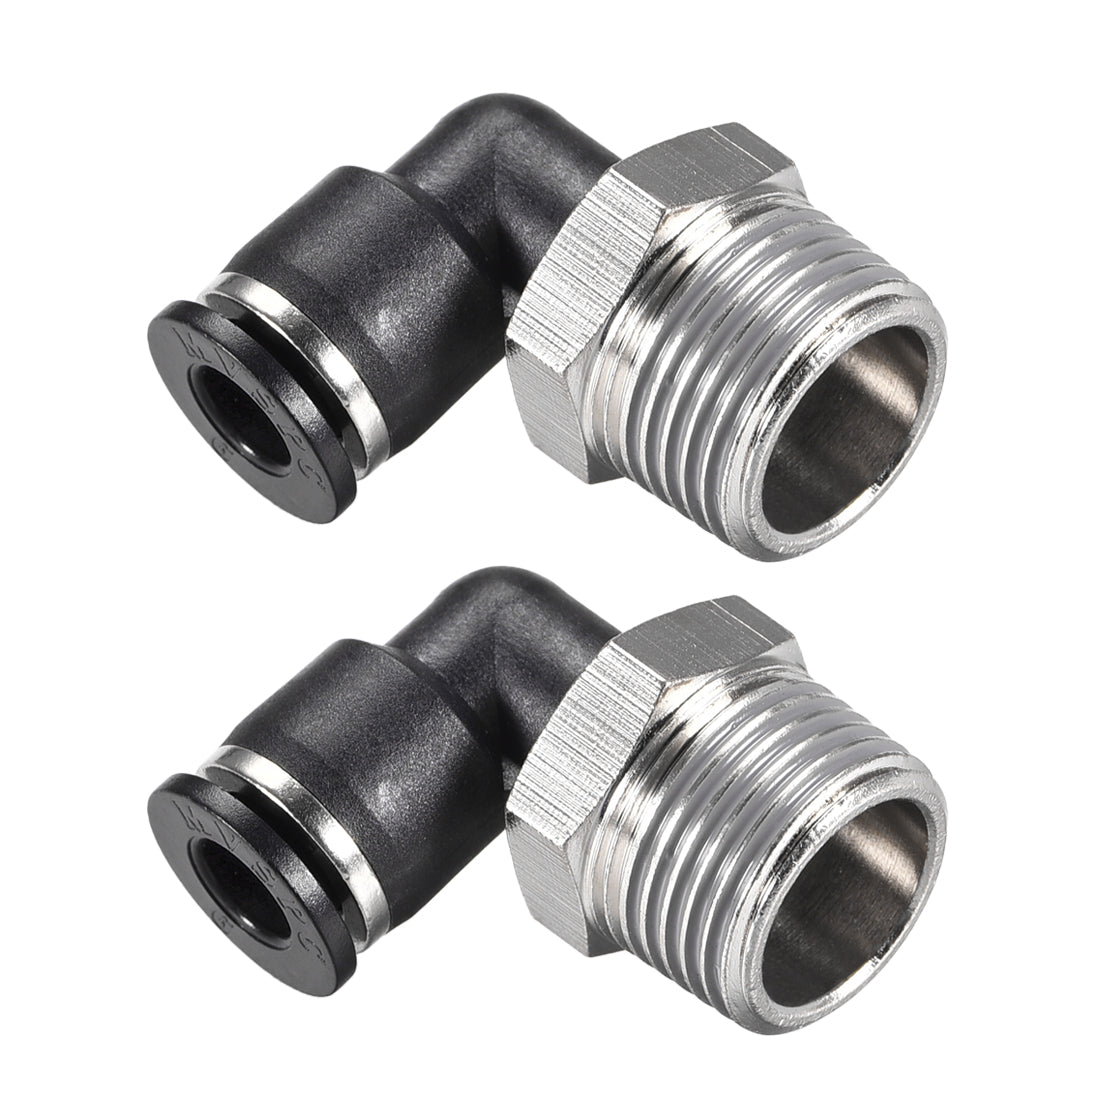 uxcell Uxcell Push to Connect Tube Fitting Male Elbow 6mm Tube OD x 3/8 NPT Thread Pneumatic Air Push Fit Lock Fitting 2pcs